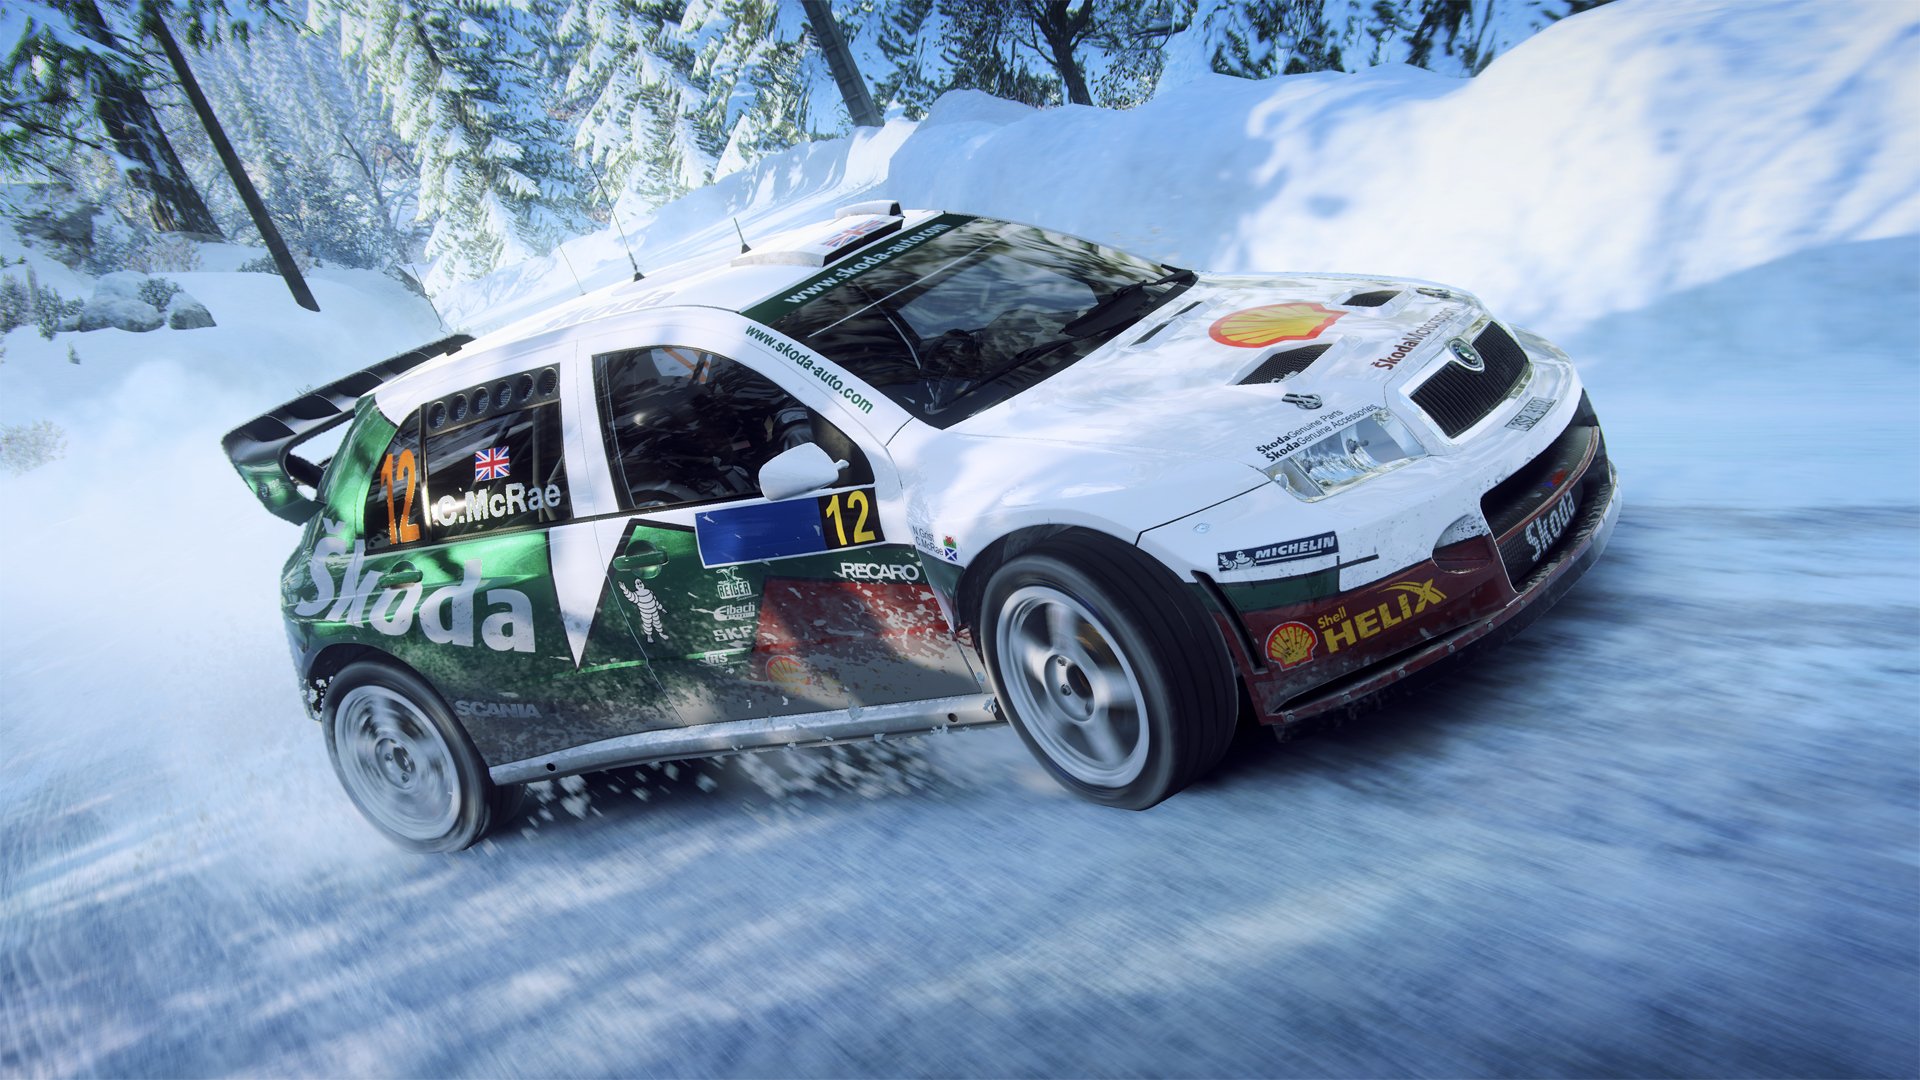 More information about "DiRT Rally 2.0: DLC Season 1 in arrivo il 15 Marzo"